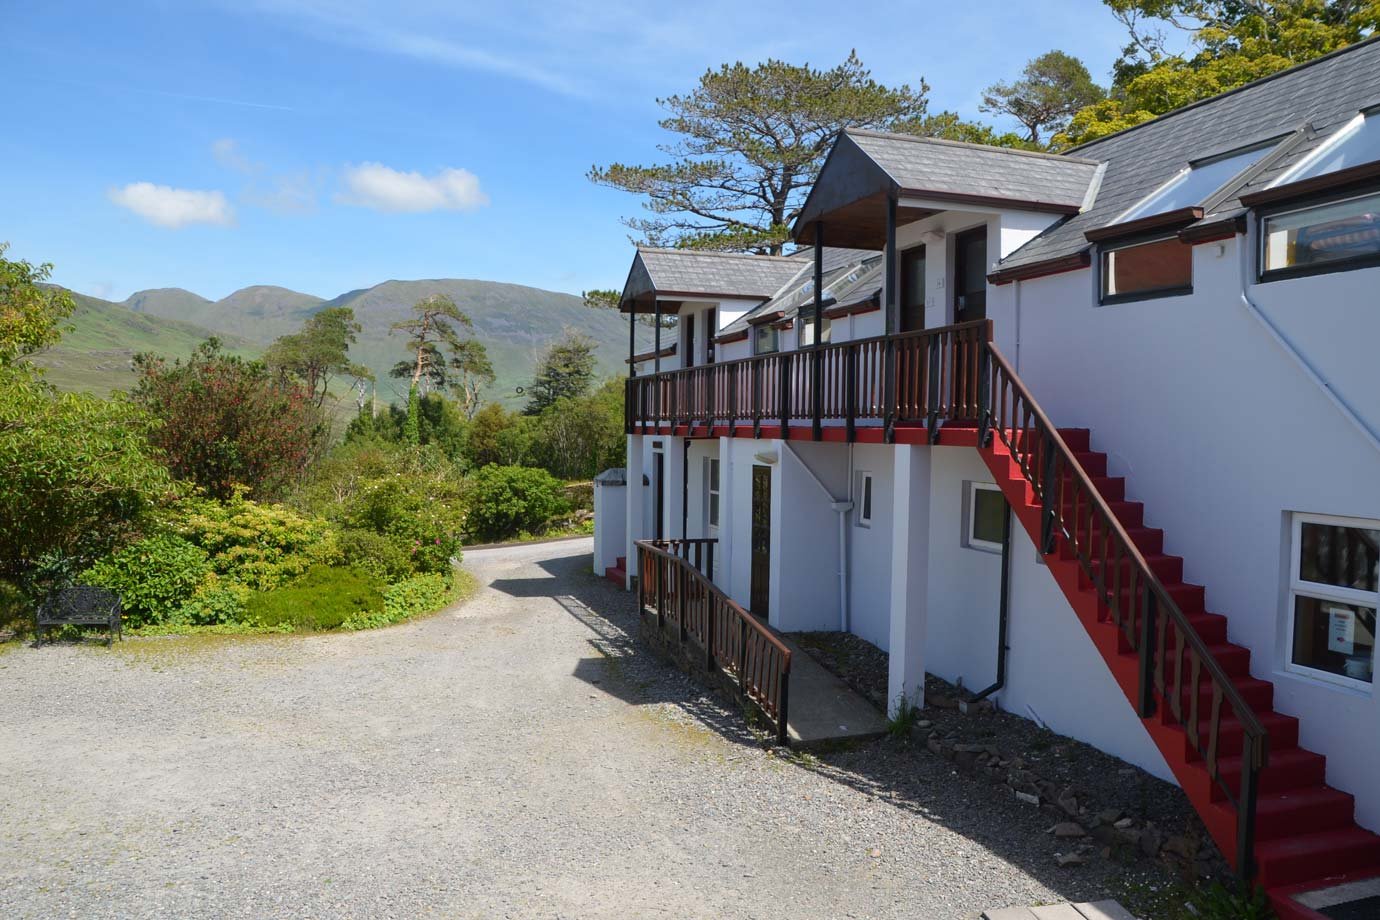 View of Connemara Hostel with Green Hills and Blue Sky on the Background